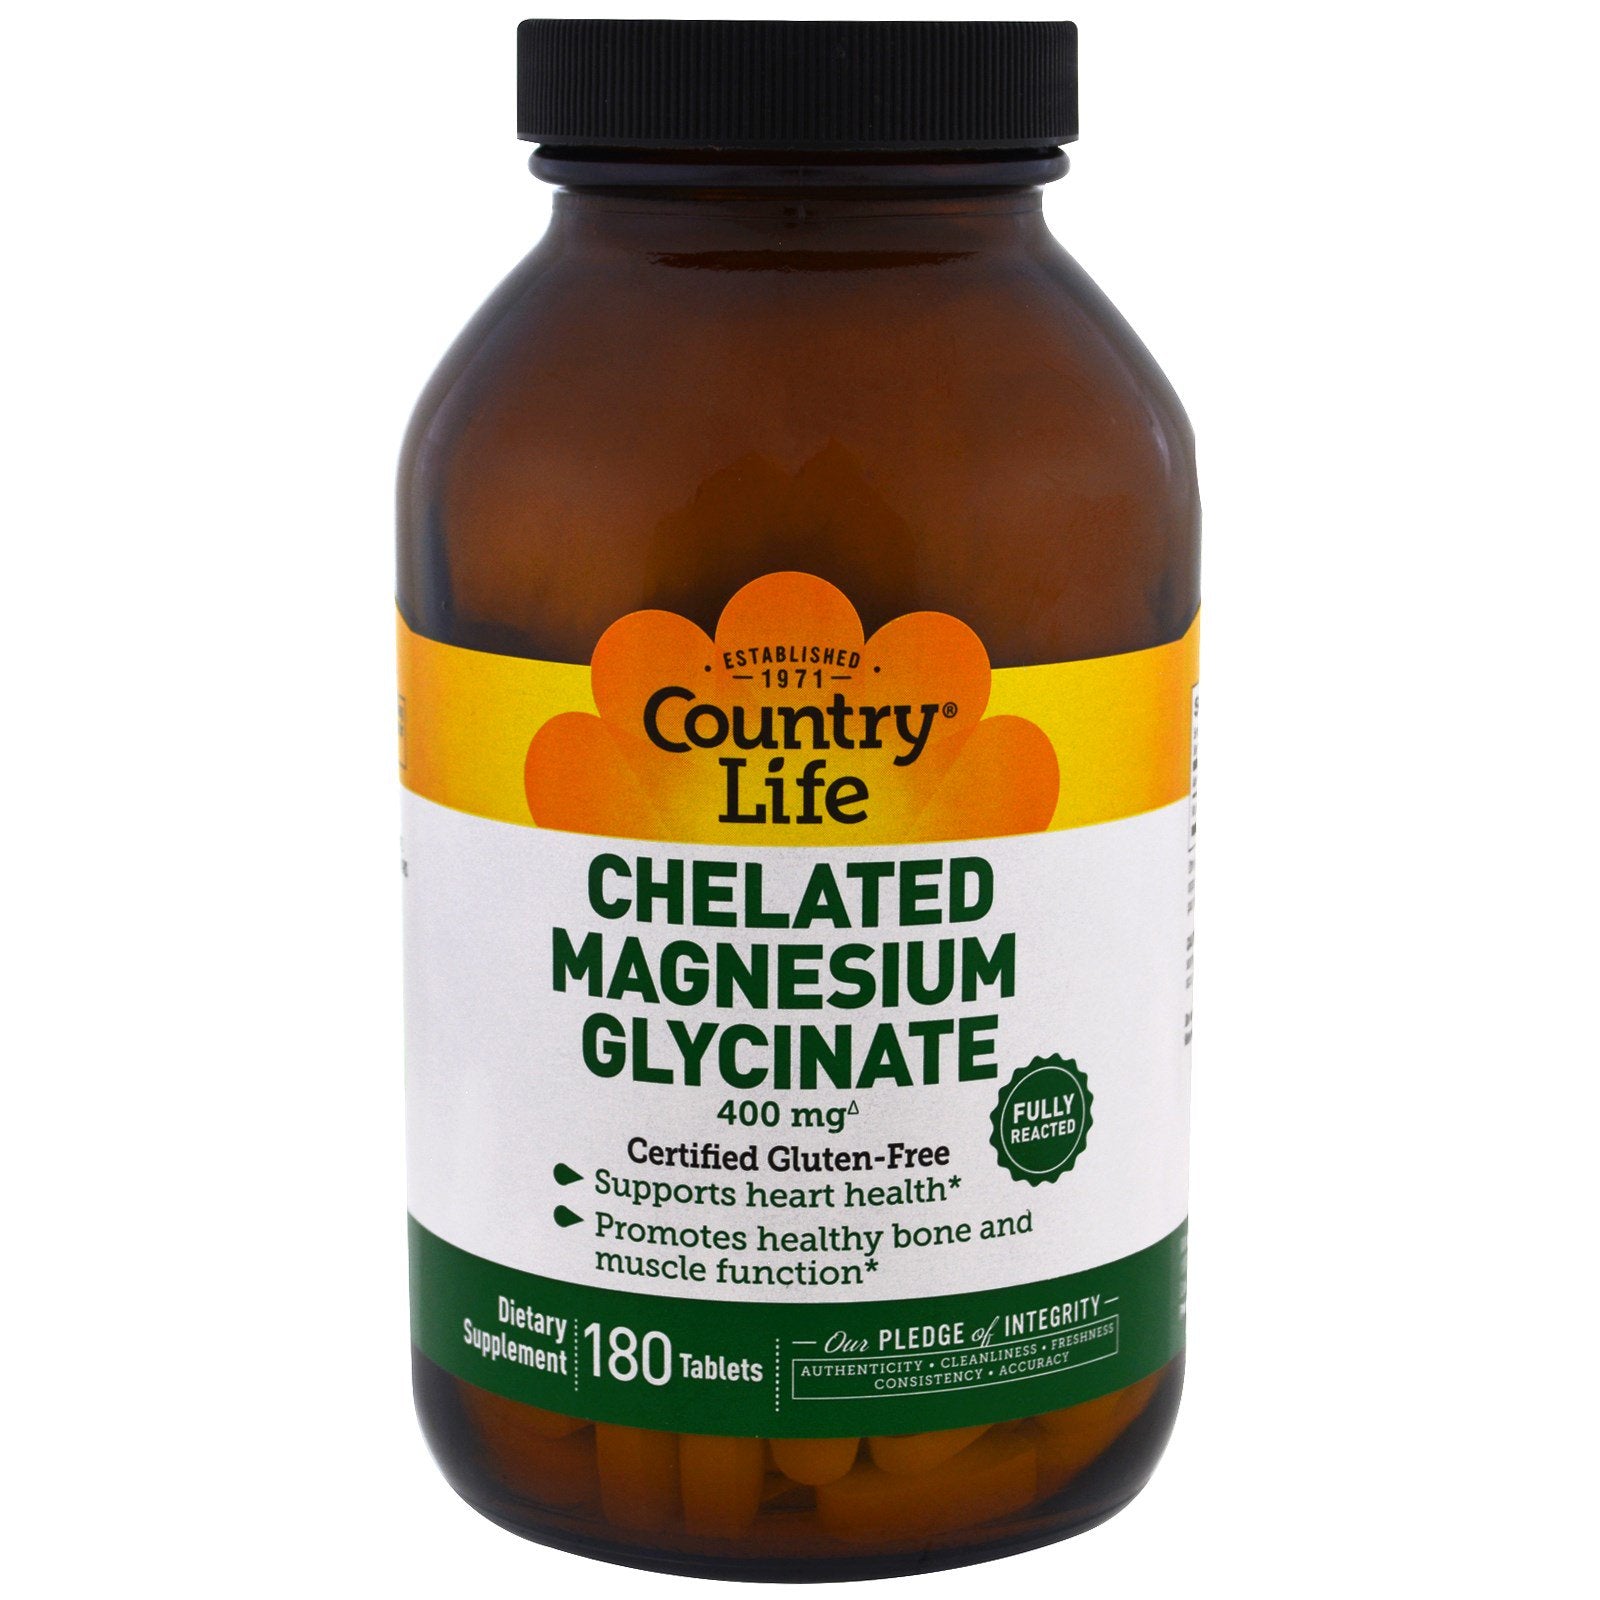 Country Life, Chelated Magnesium Glycinate, 400 mg, 180 Tablets